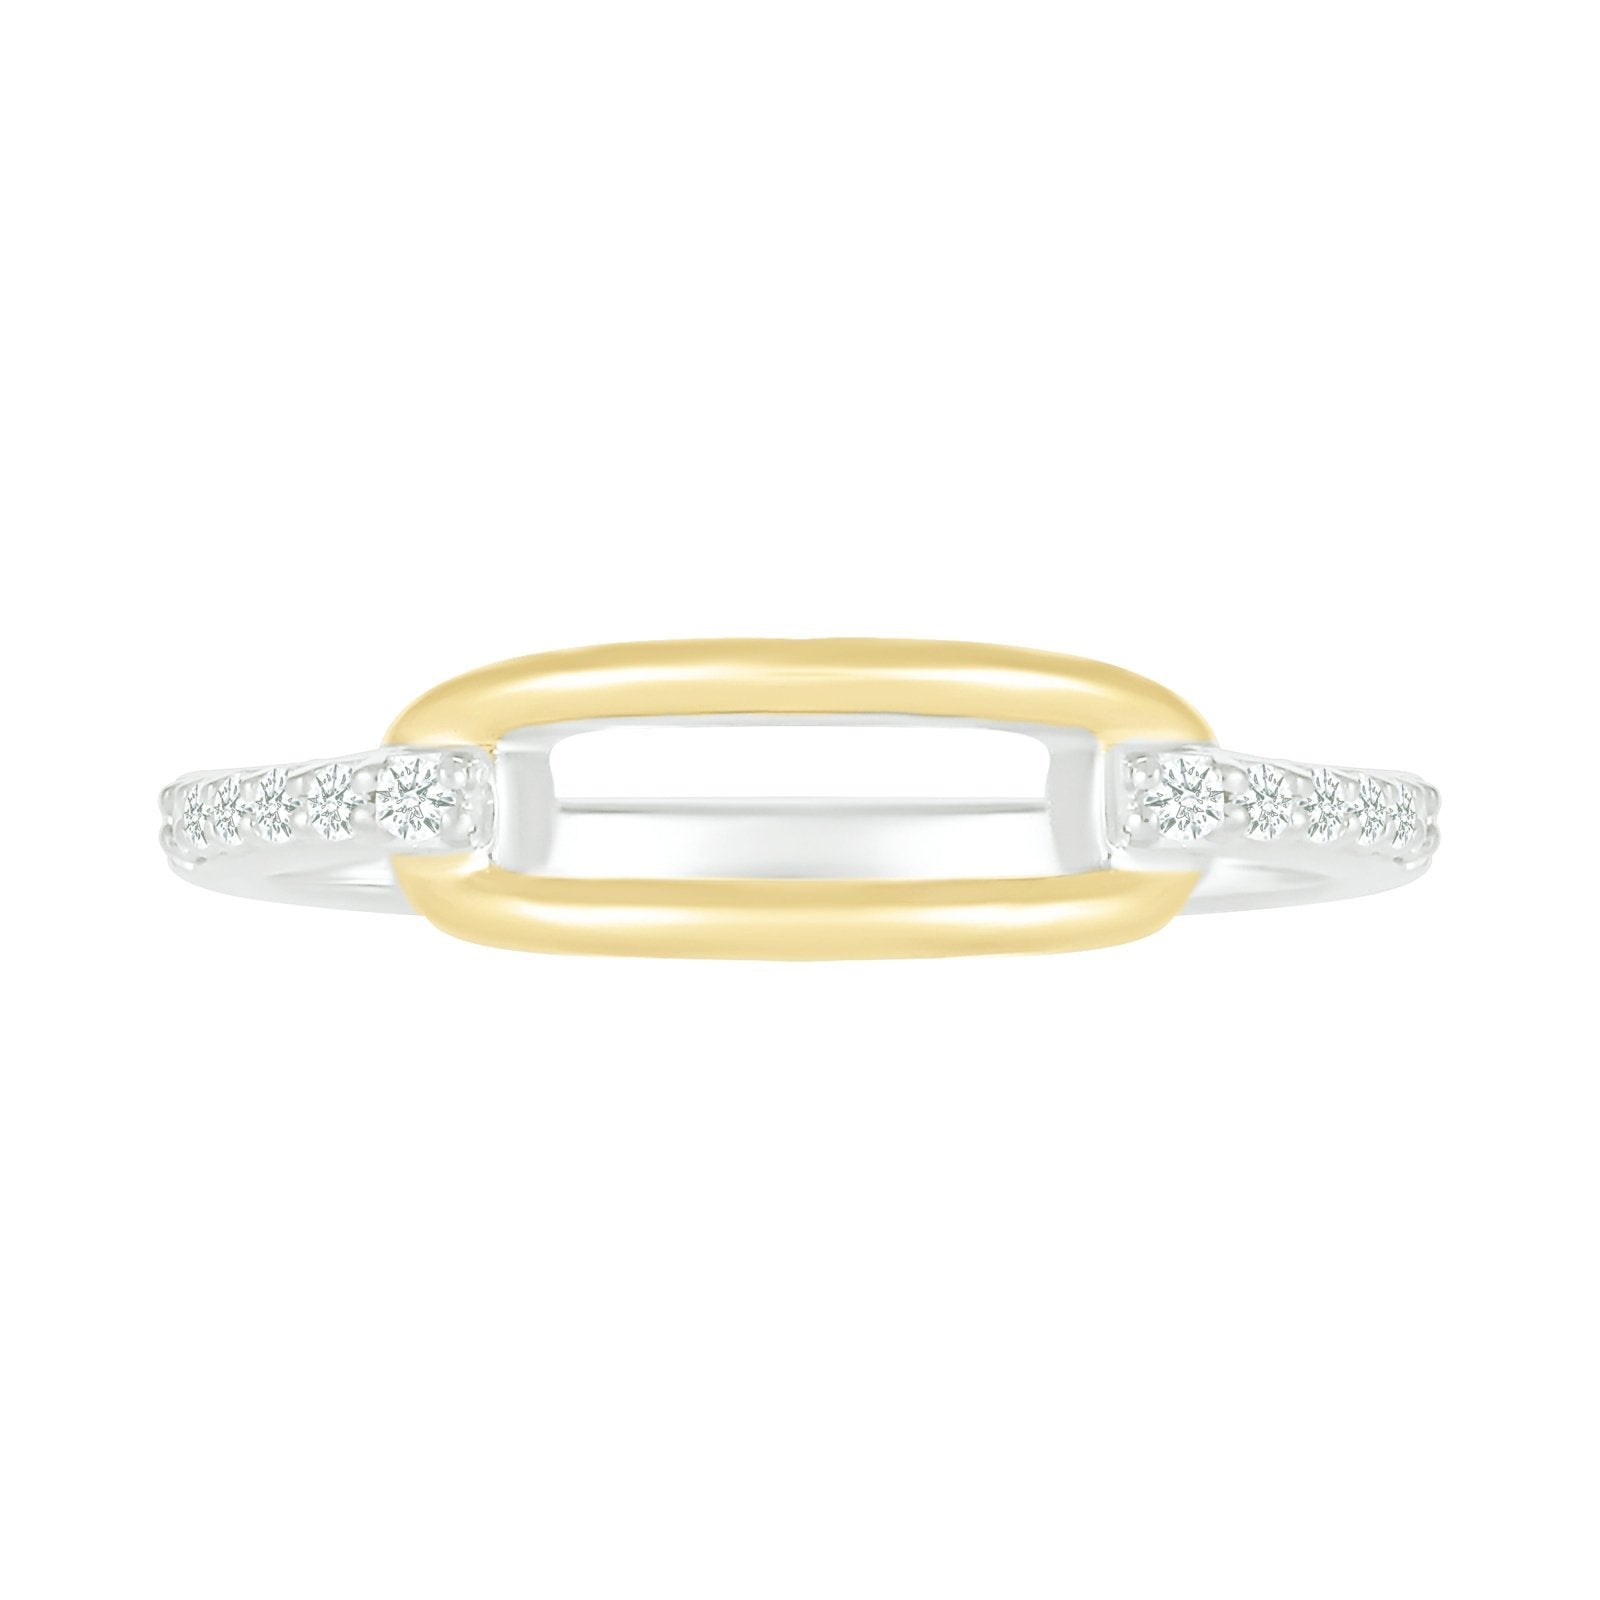 Gold Paperclip Link Ring with Diamonds Rings Estella Collection 32744 925 Diamond Sterling Silver #tag4# #tag5# #tag6# #tag7# #tag8# #tag9# #tag10#